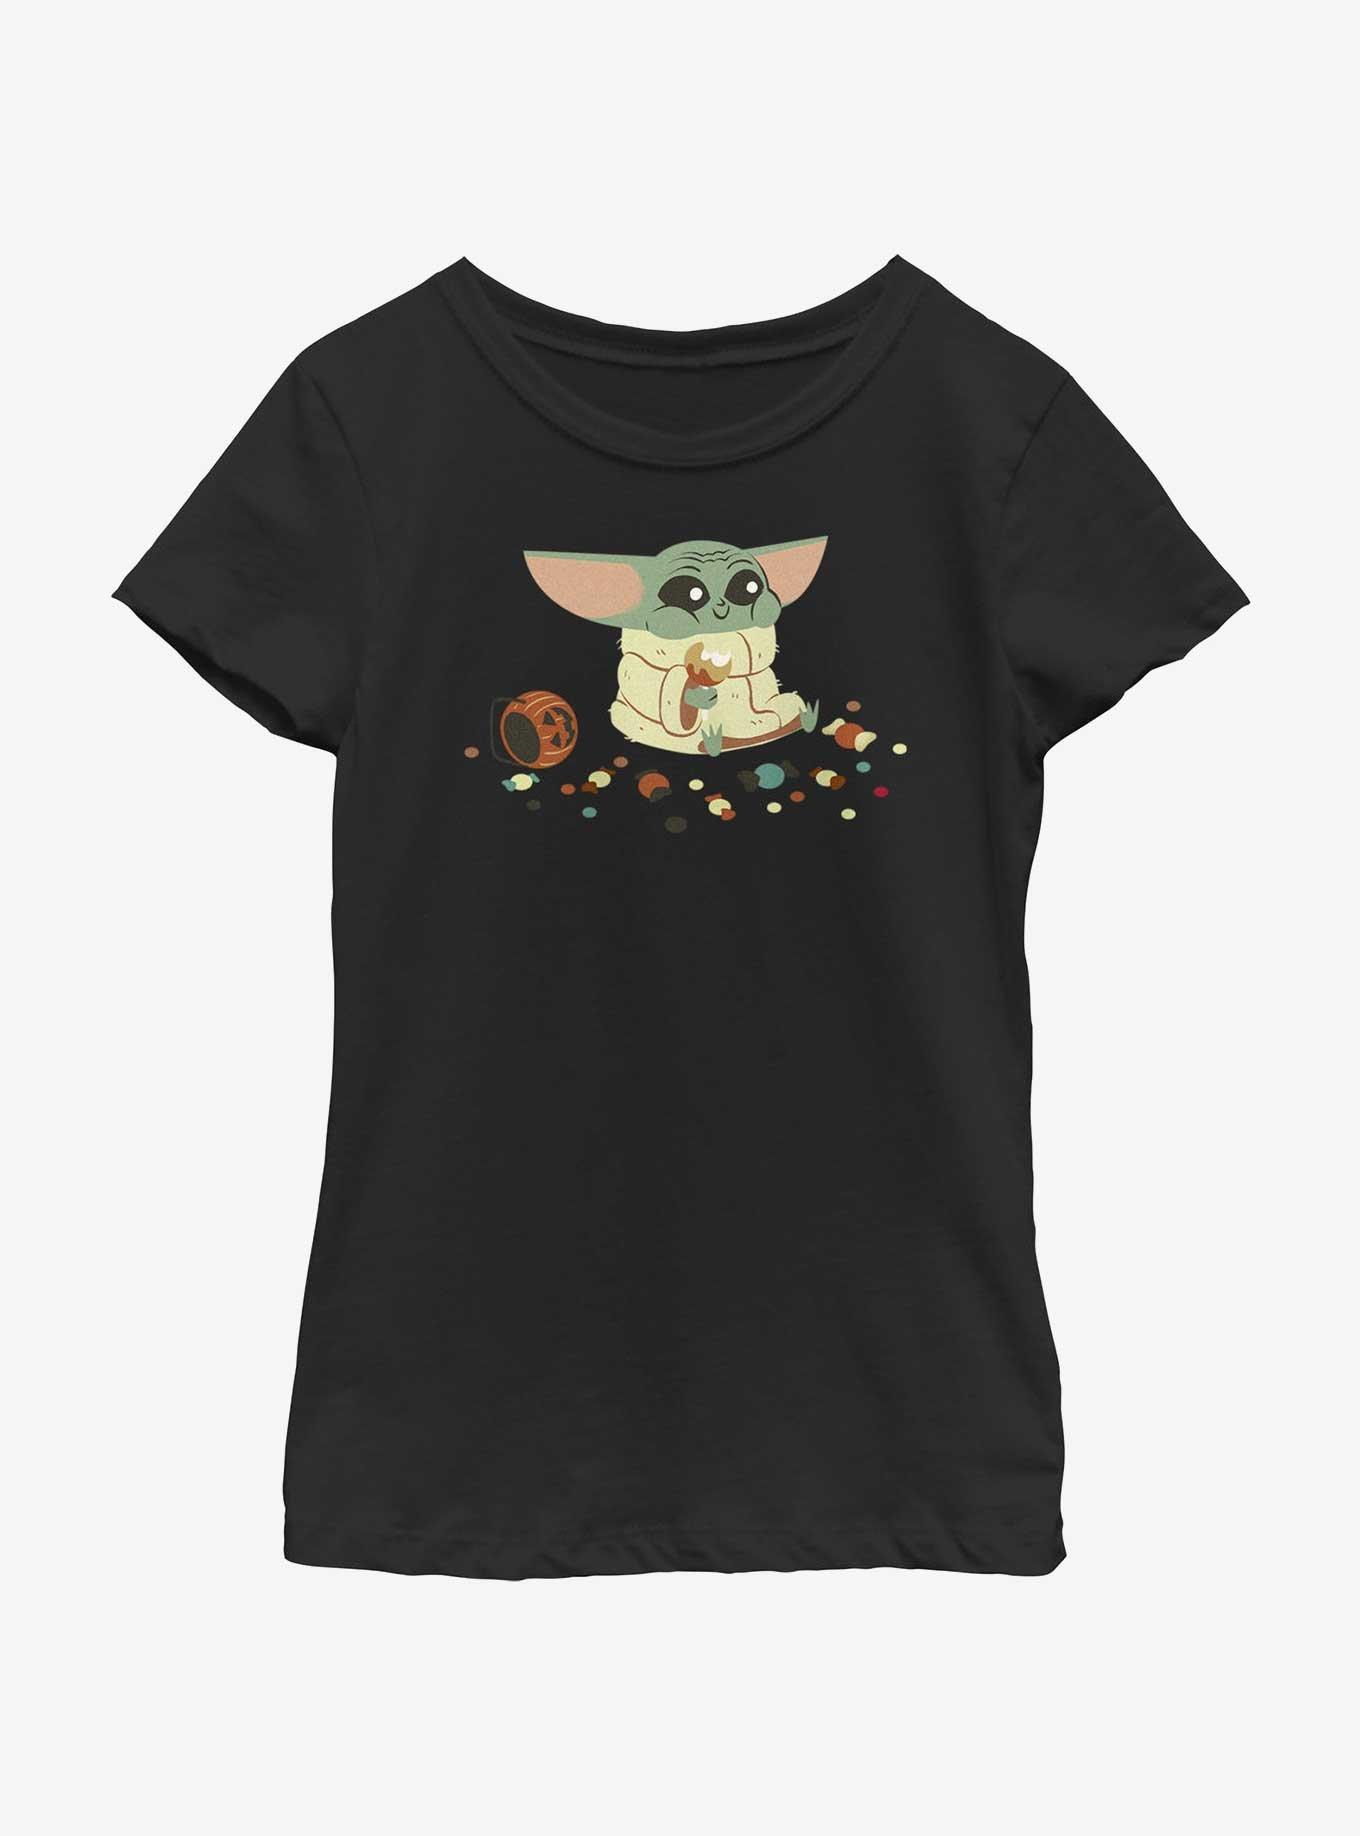 Star Wars The Mandalorian The Child Eating Candy Youth Girls T-Shirt, BLACK, hi-res